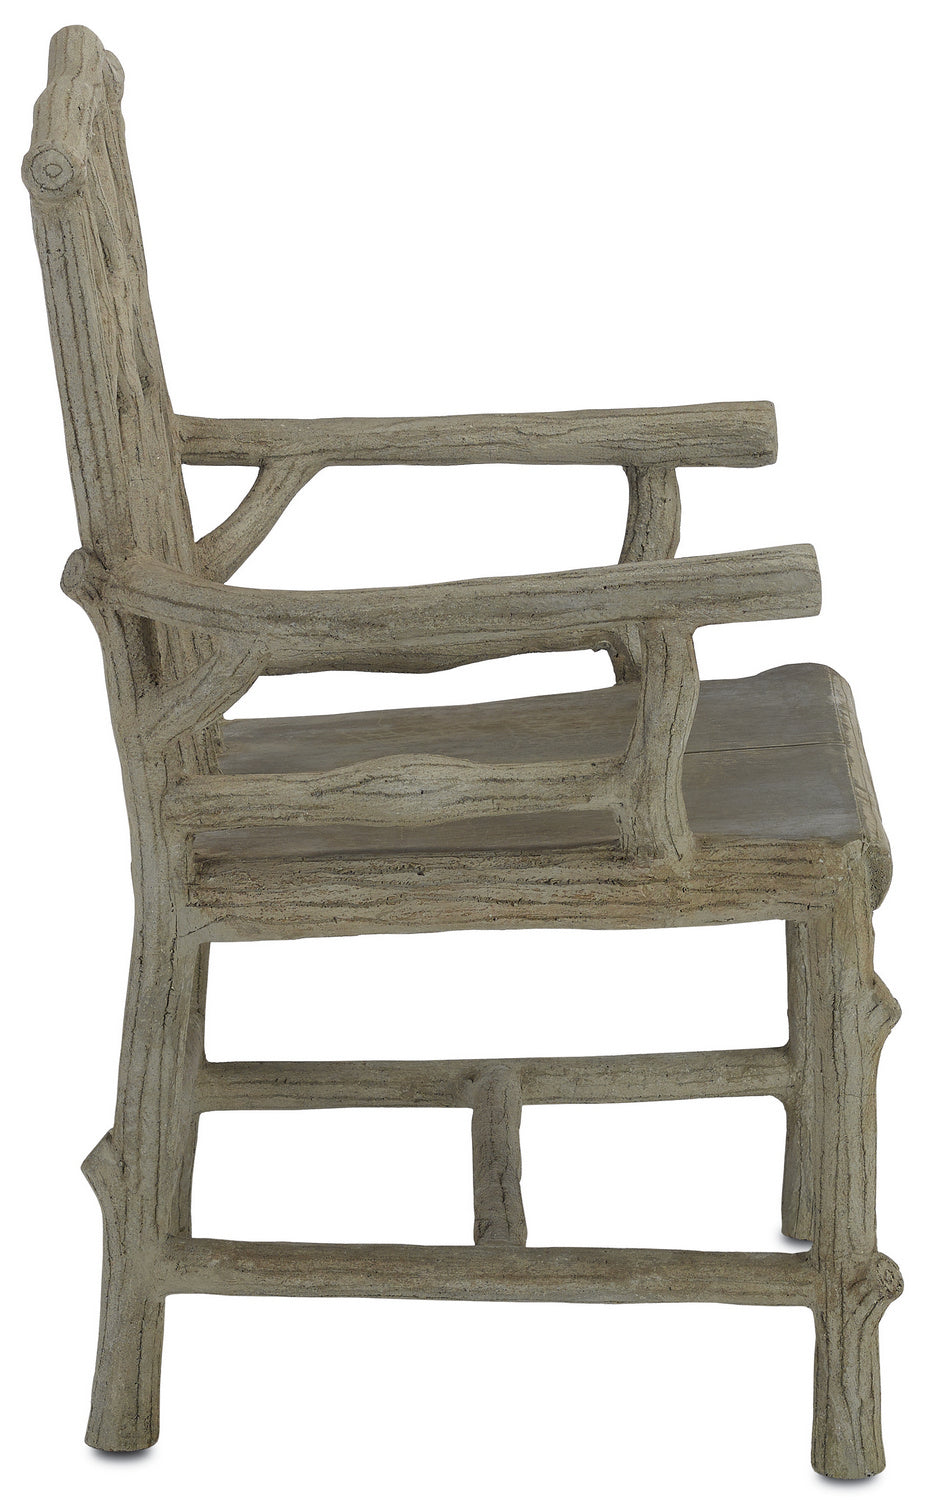 Chair from the Woodland collection in Portland/Faux Bois finish